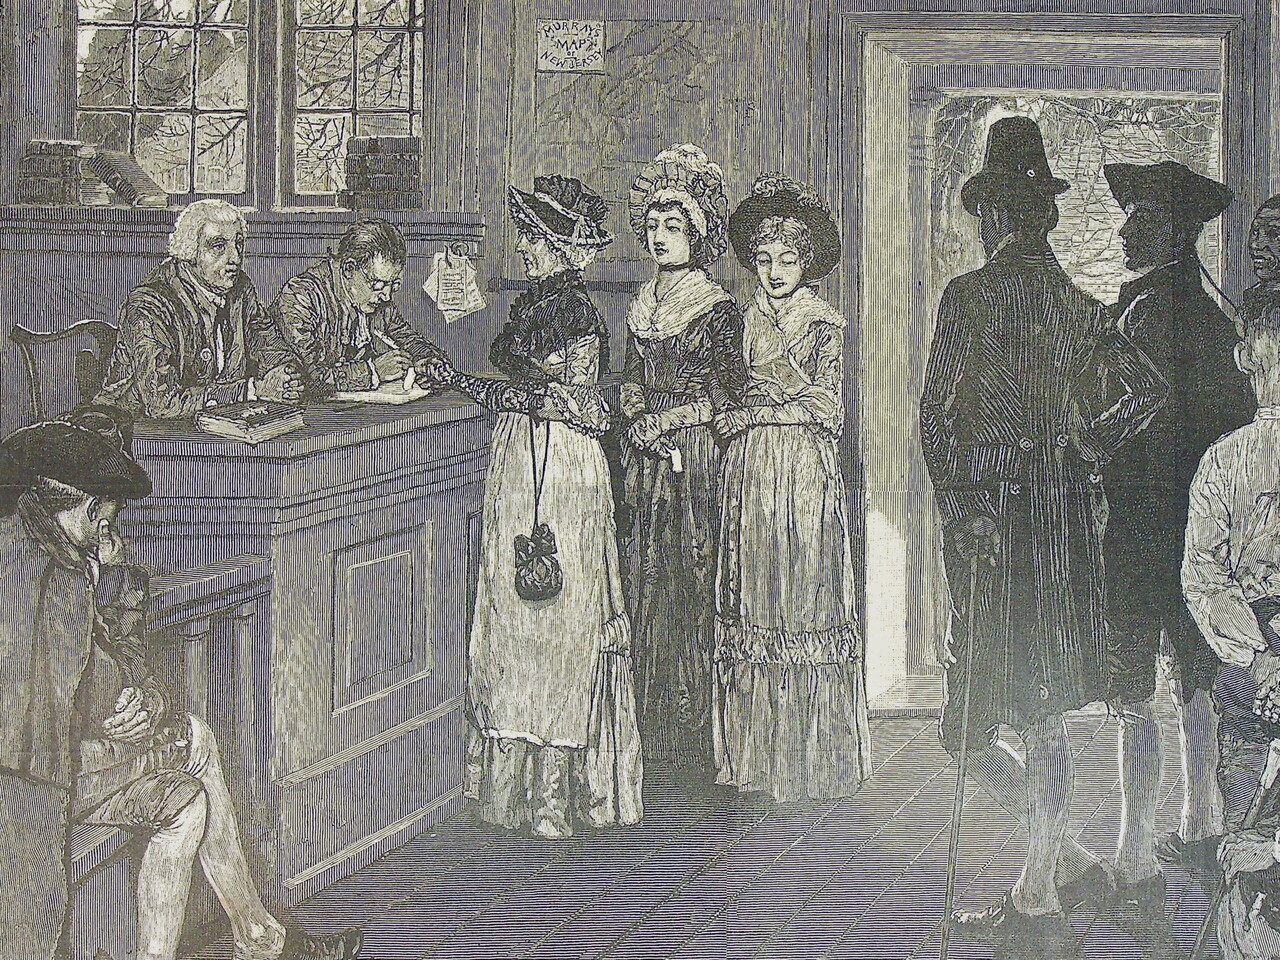 Image showing scene of women voting in New Jersey